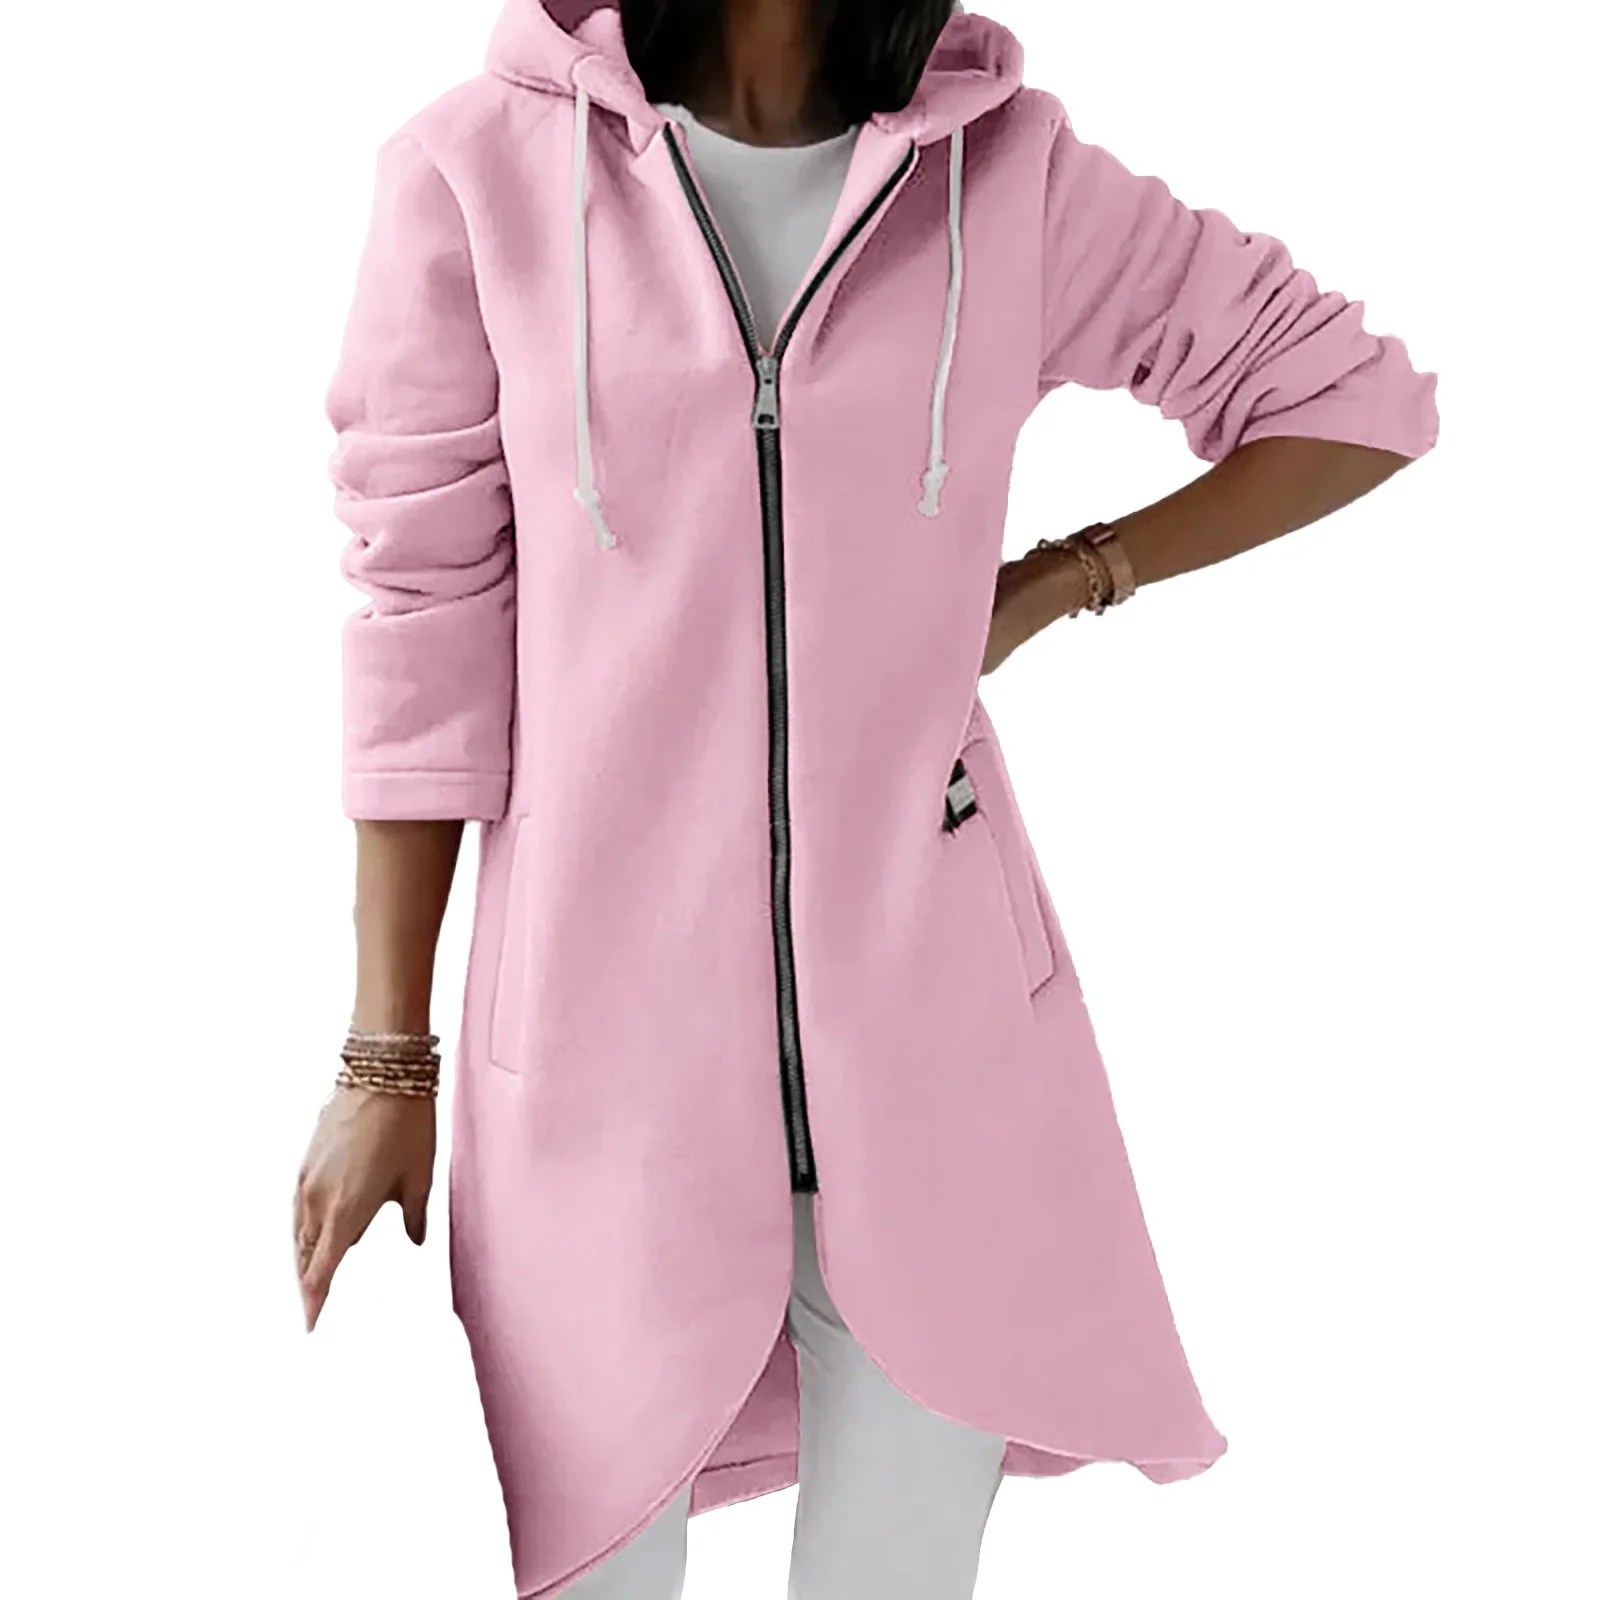 

Fashionable Hooded Coat Lightweight and Comfortable Perfect for Casual Wear Multiple Colors and Sizes Available